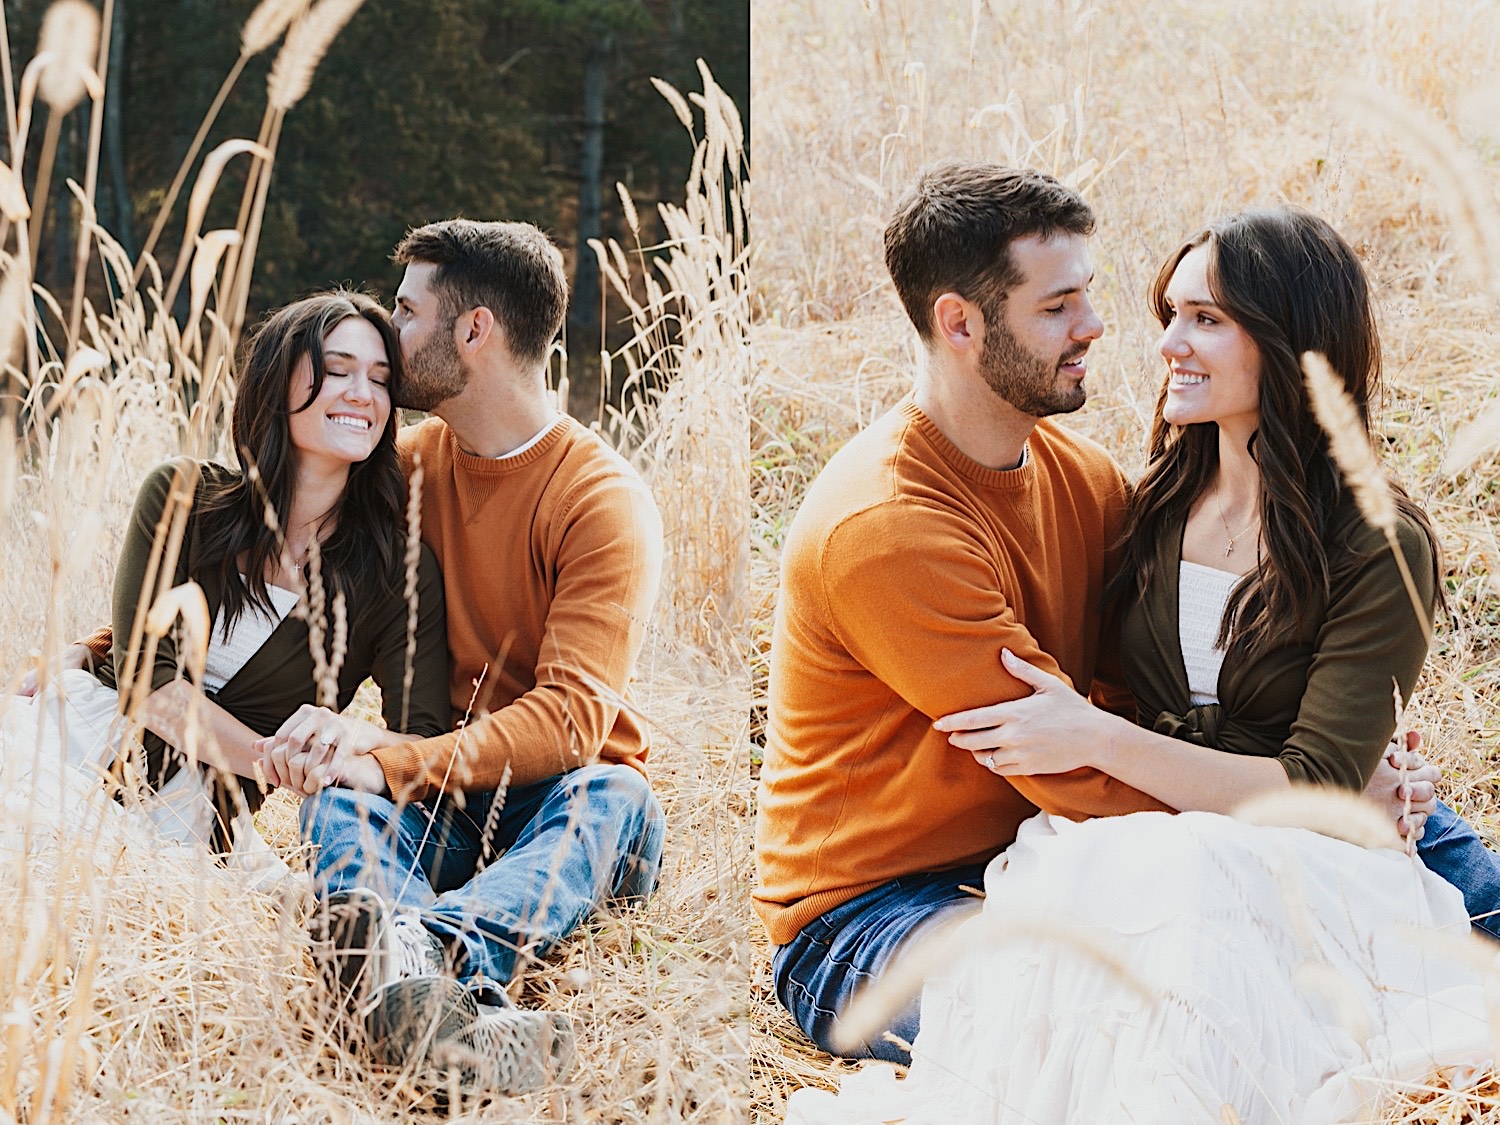 2 photos side by side of a couple, the left is of the woman smiling while the man kisses her on the head while they sit in a field, the right photo of the same couple sit in a field and smile at one another